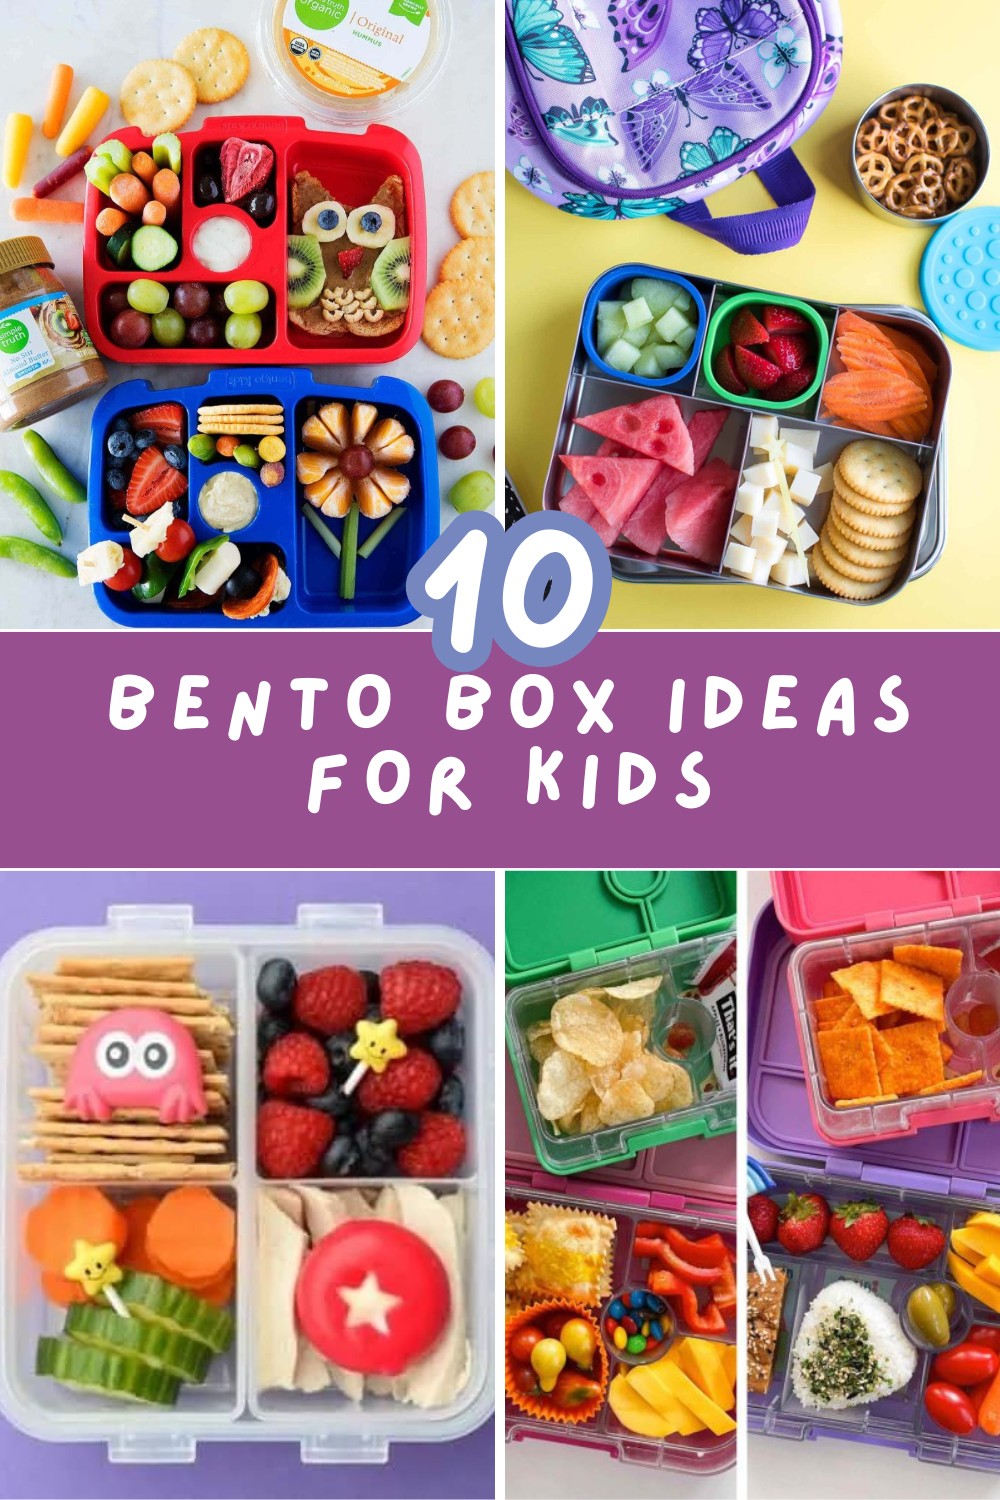 Meal prepping for kids can be a challenge, but these 10 bento box lunch ideas make it easy! Whether your child is a picky eater or has dietary restrictions, these fun and healthy options will make lunchtime a breeze. 🌈🍏 #BentoLunch #HealthyKids #LunchIdeas